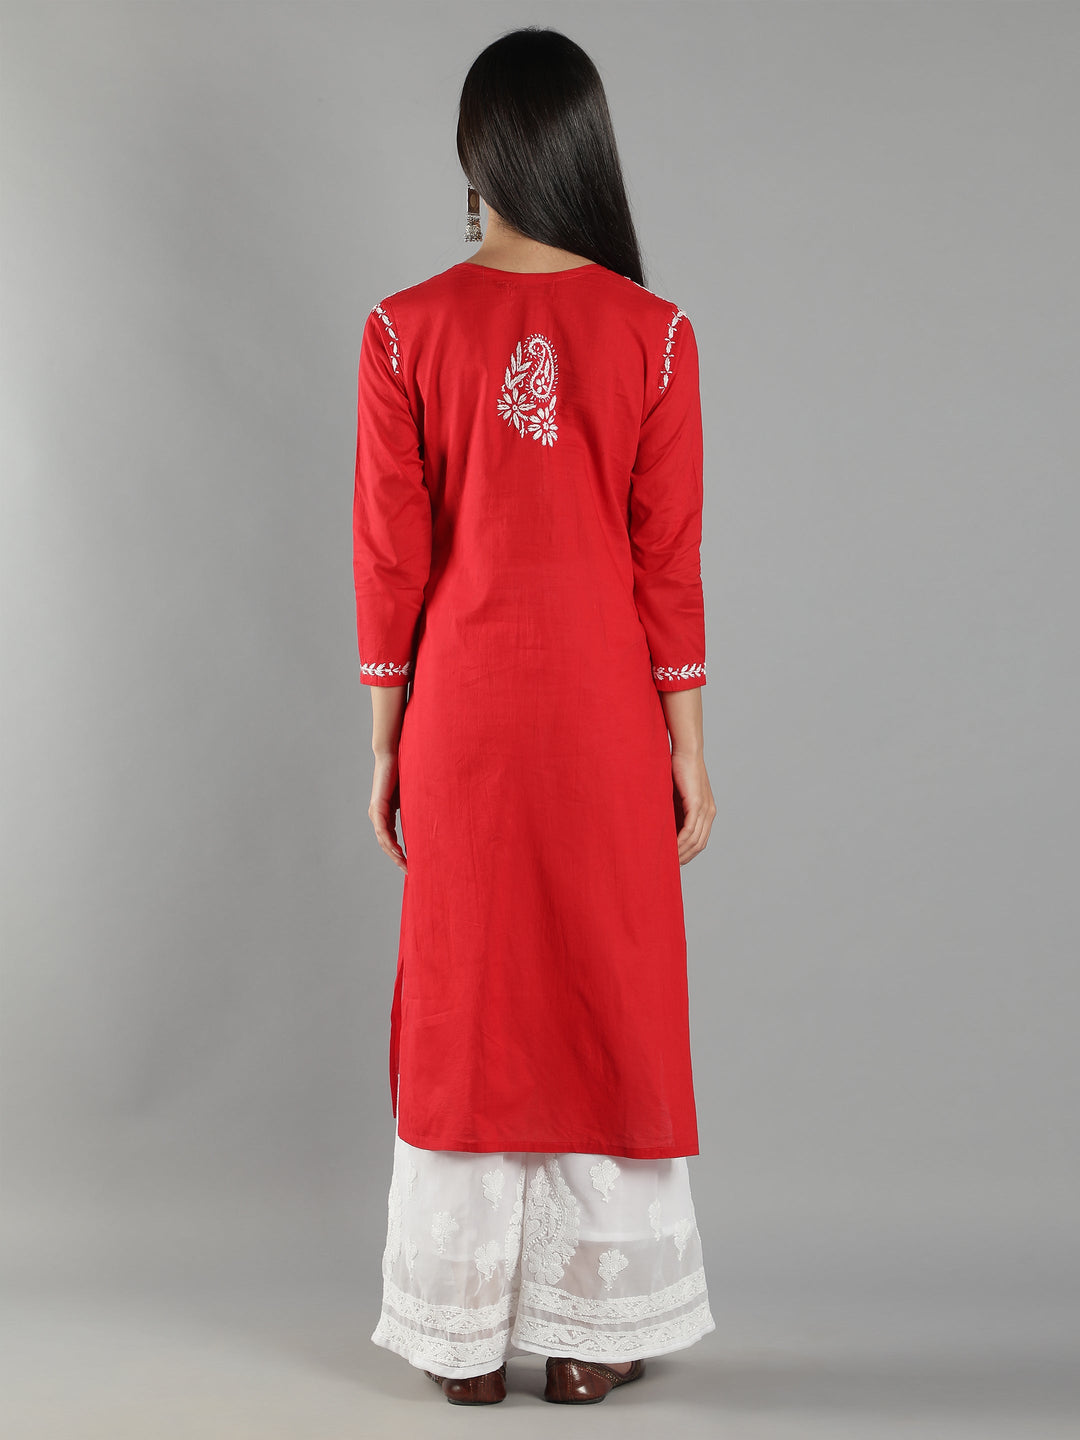 Red-Cotton-Chikan-Kurta-in-White-Embroidery